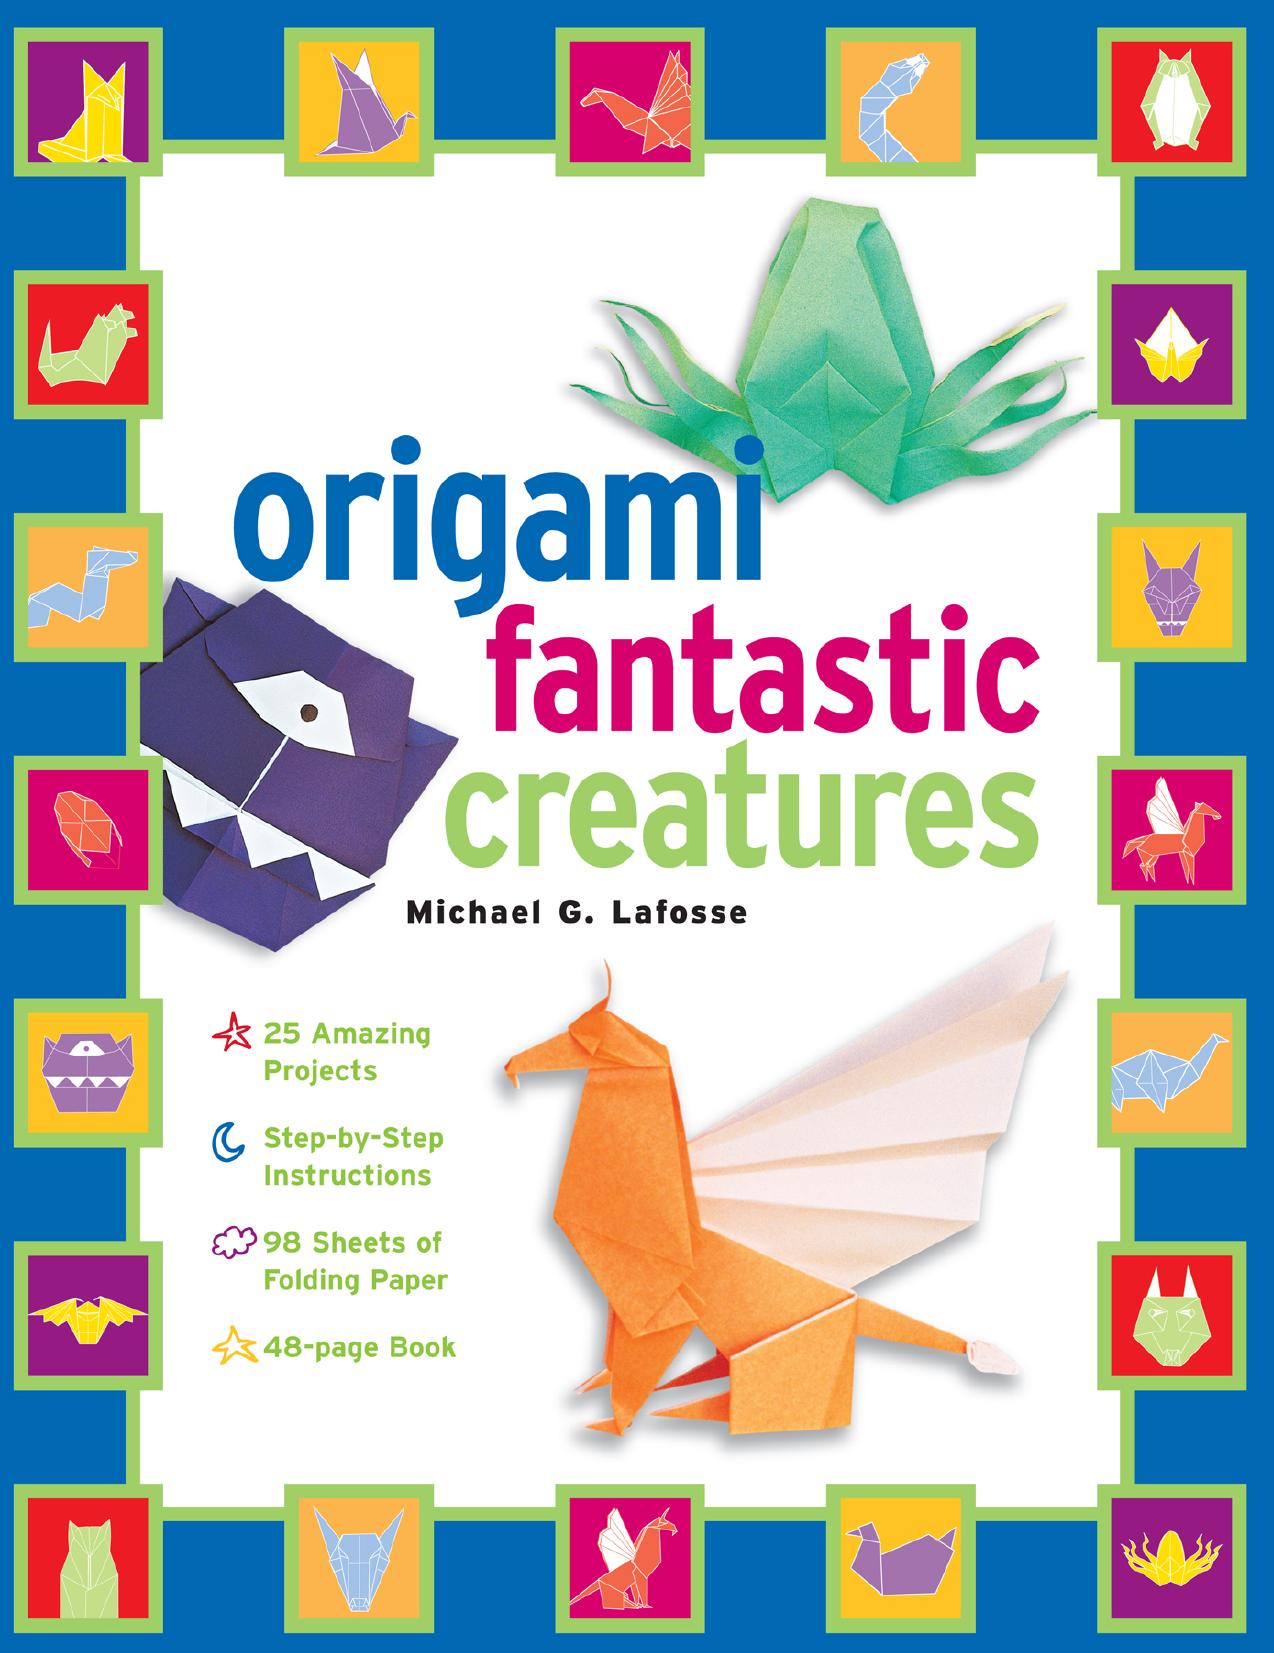 Origami Fantastic Creatures by Michael G. Lafosse